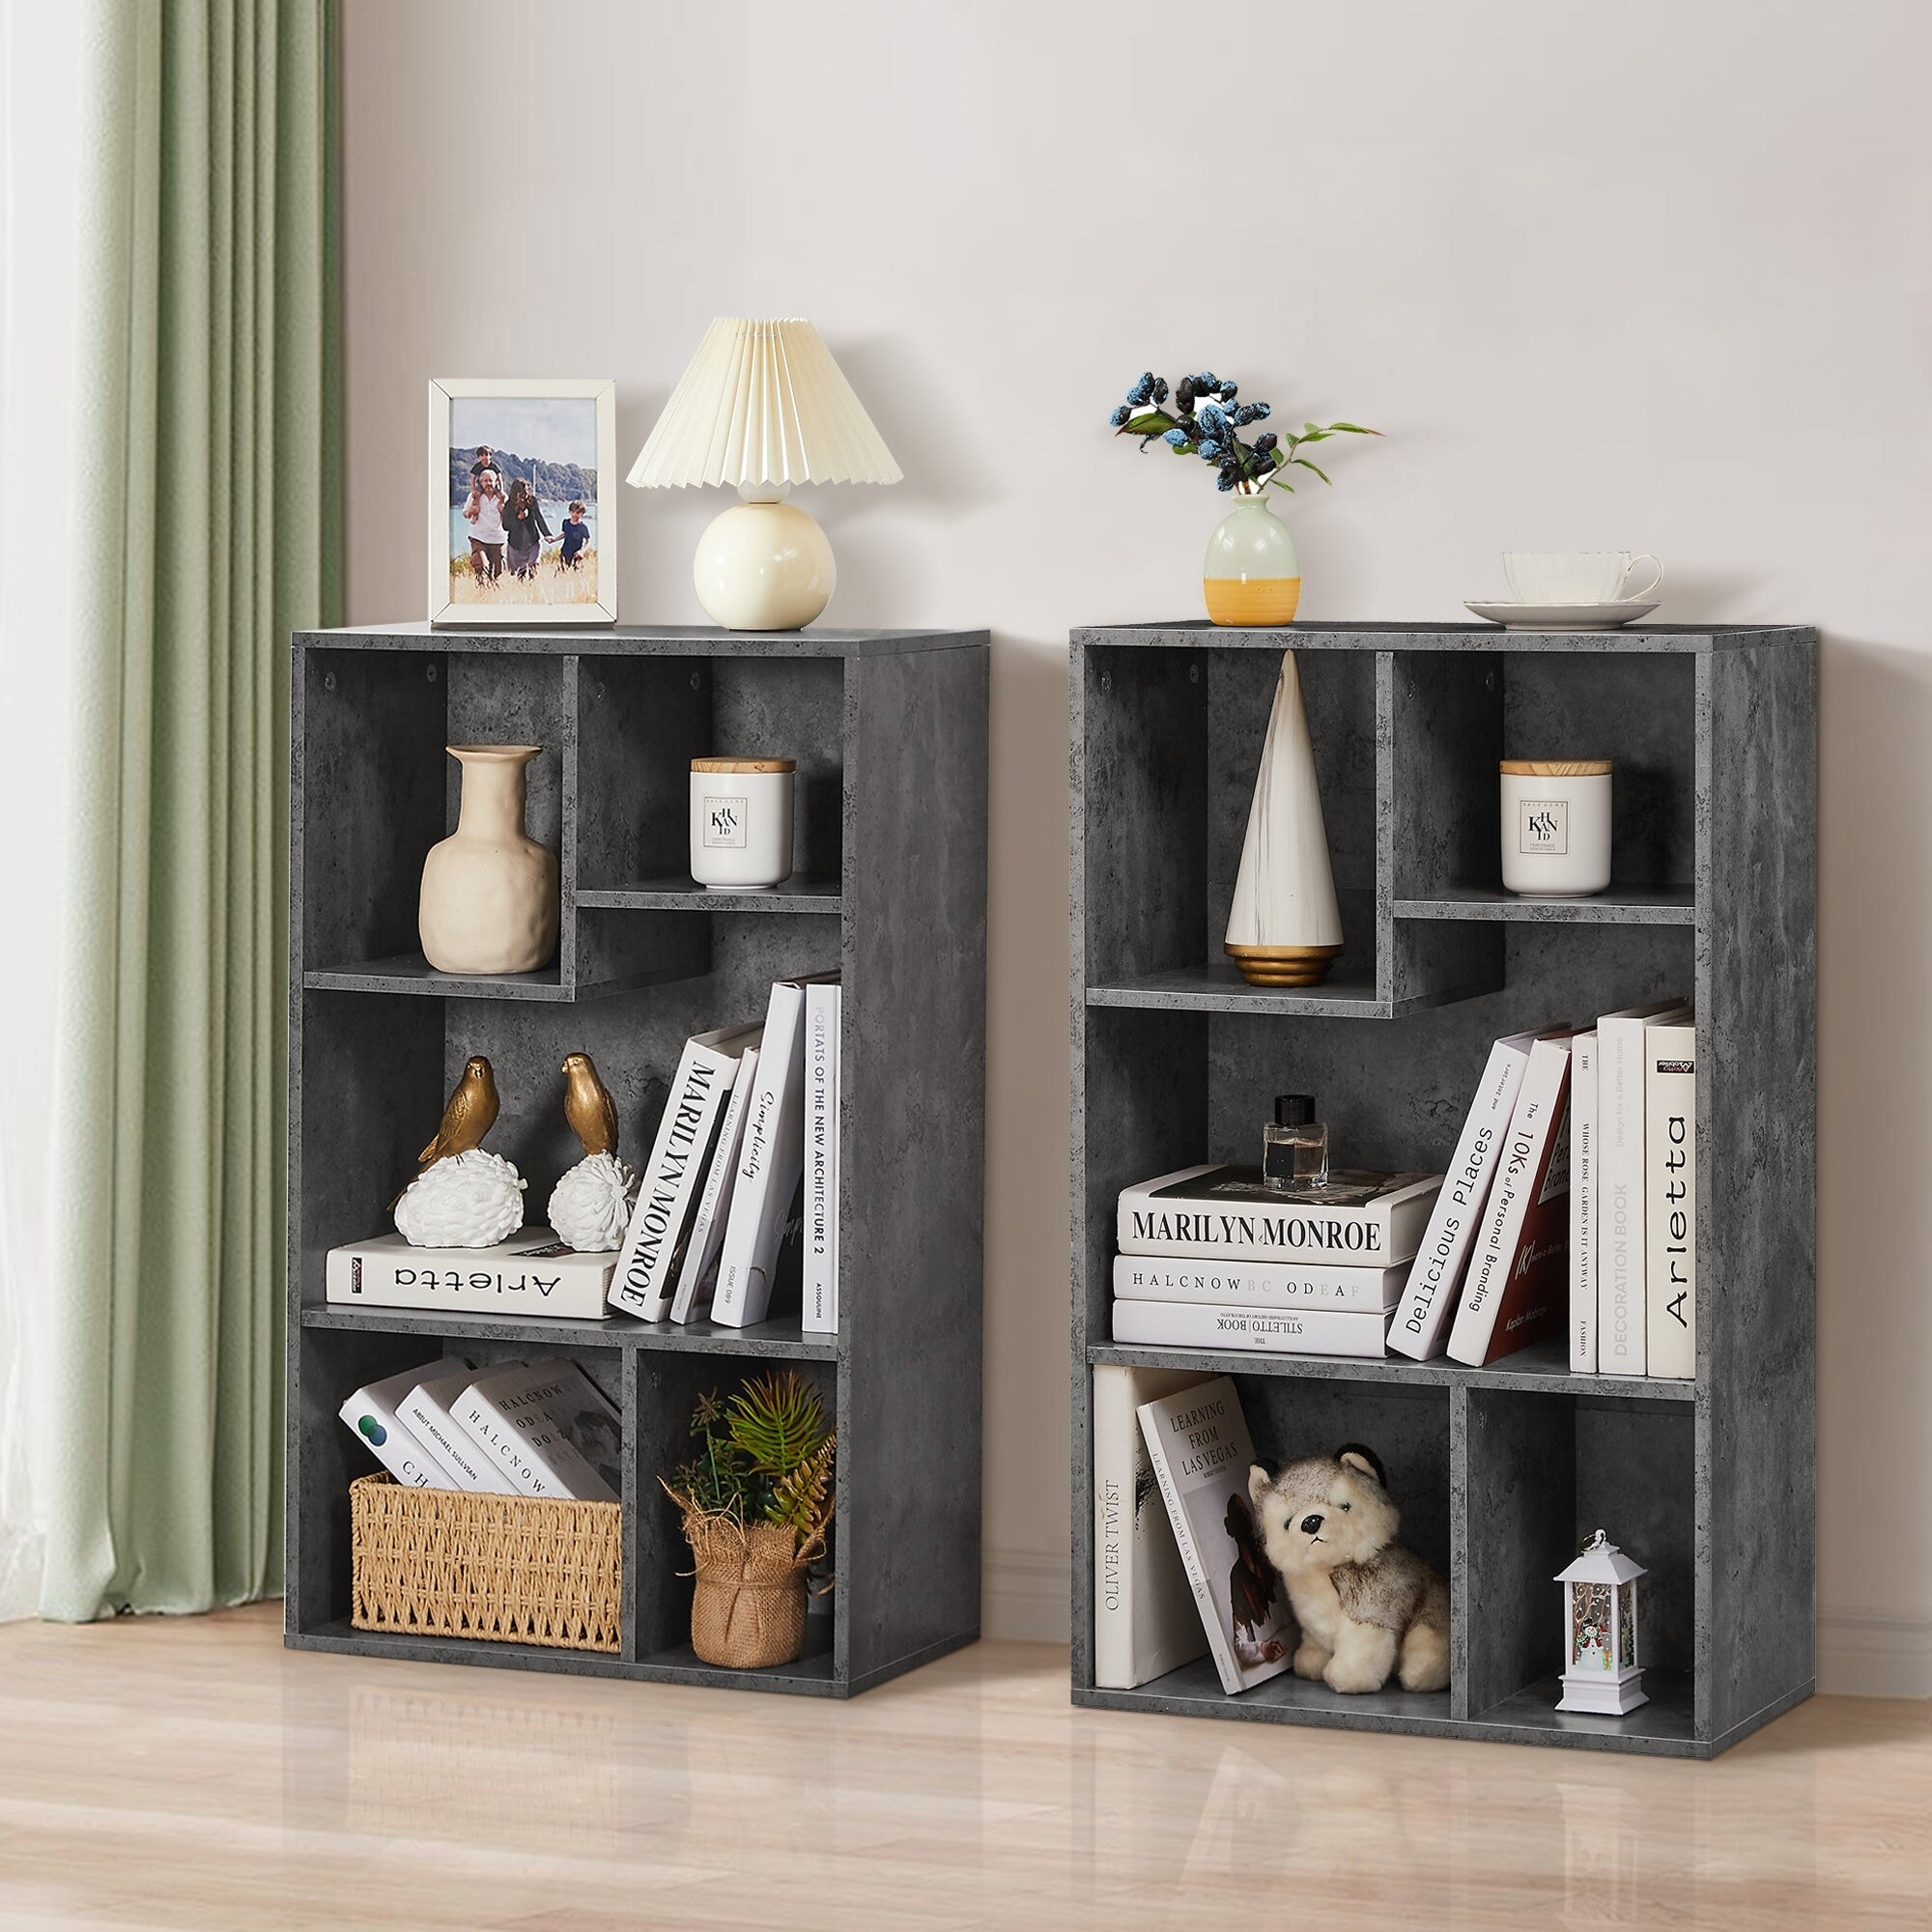 https://ak1.ostkcdn.com/images/products/is/images/direct/dfcee7453c1107b4b9751ec962026e8fc3b9bcd8/4-Tier-Bookshelf%2C-Set-of-2-Tall-Bookcase-Shelf-Storage-Organizer%2C-Modern-Book-Shelf-for-Bedroom%2C-Living-Room-and-Home-Office.jpg